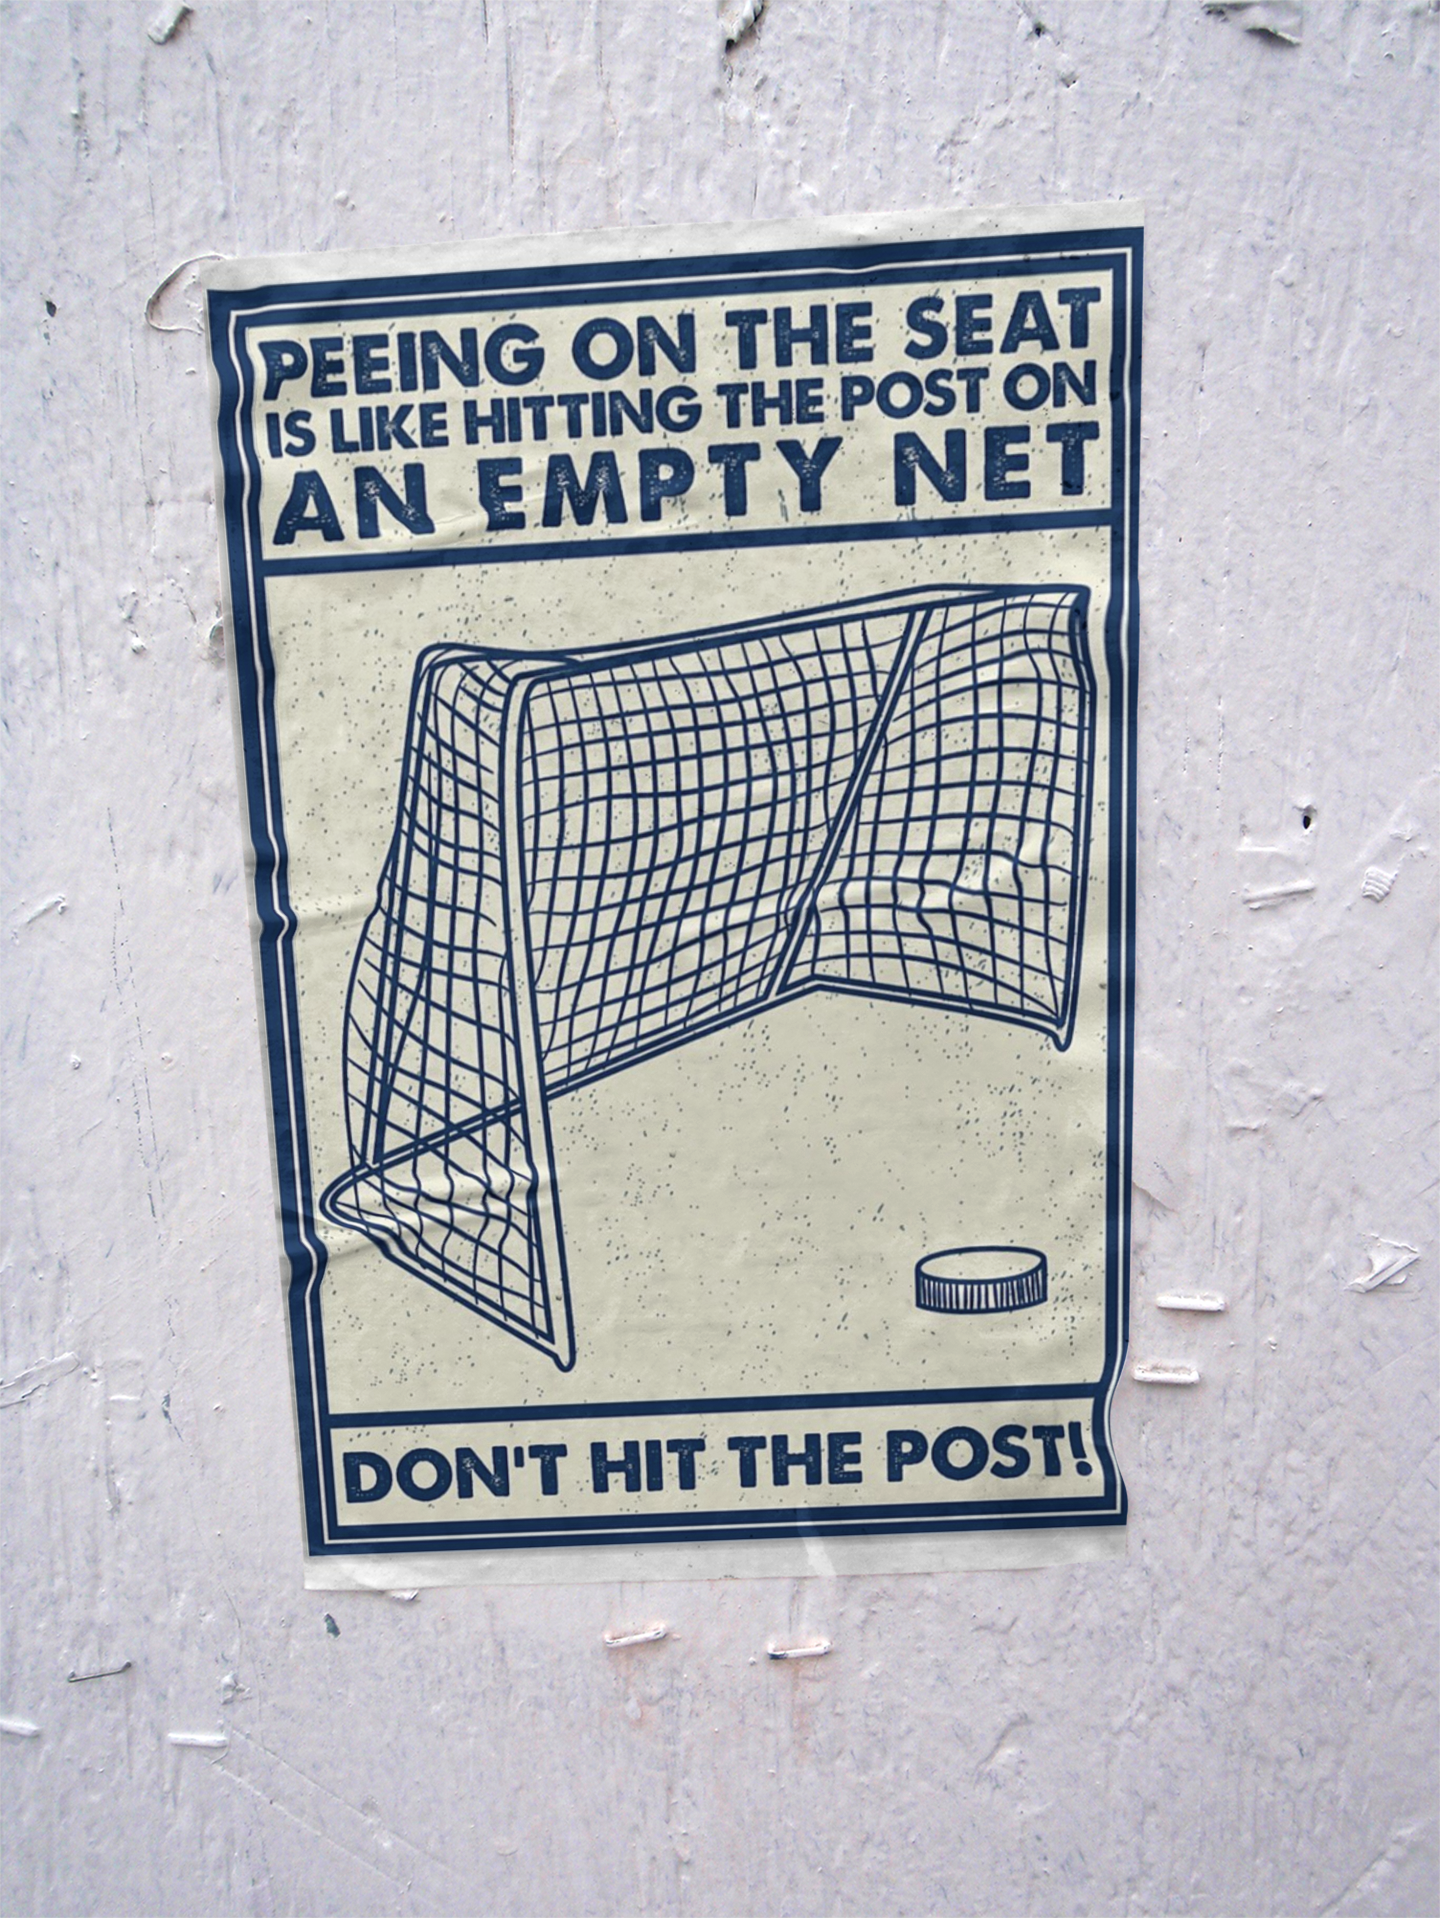 Hockey peeing on the seat don't hit the post poster 4